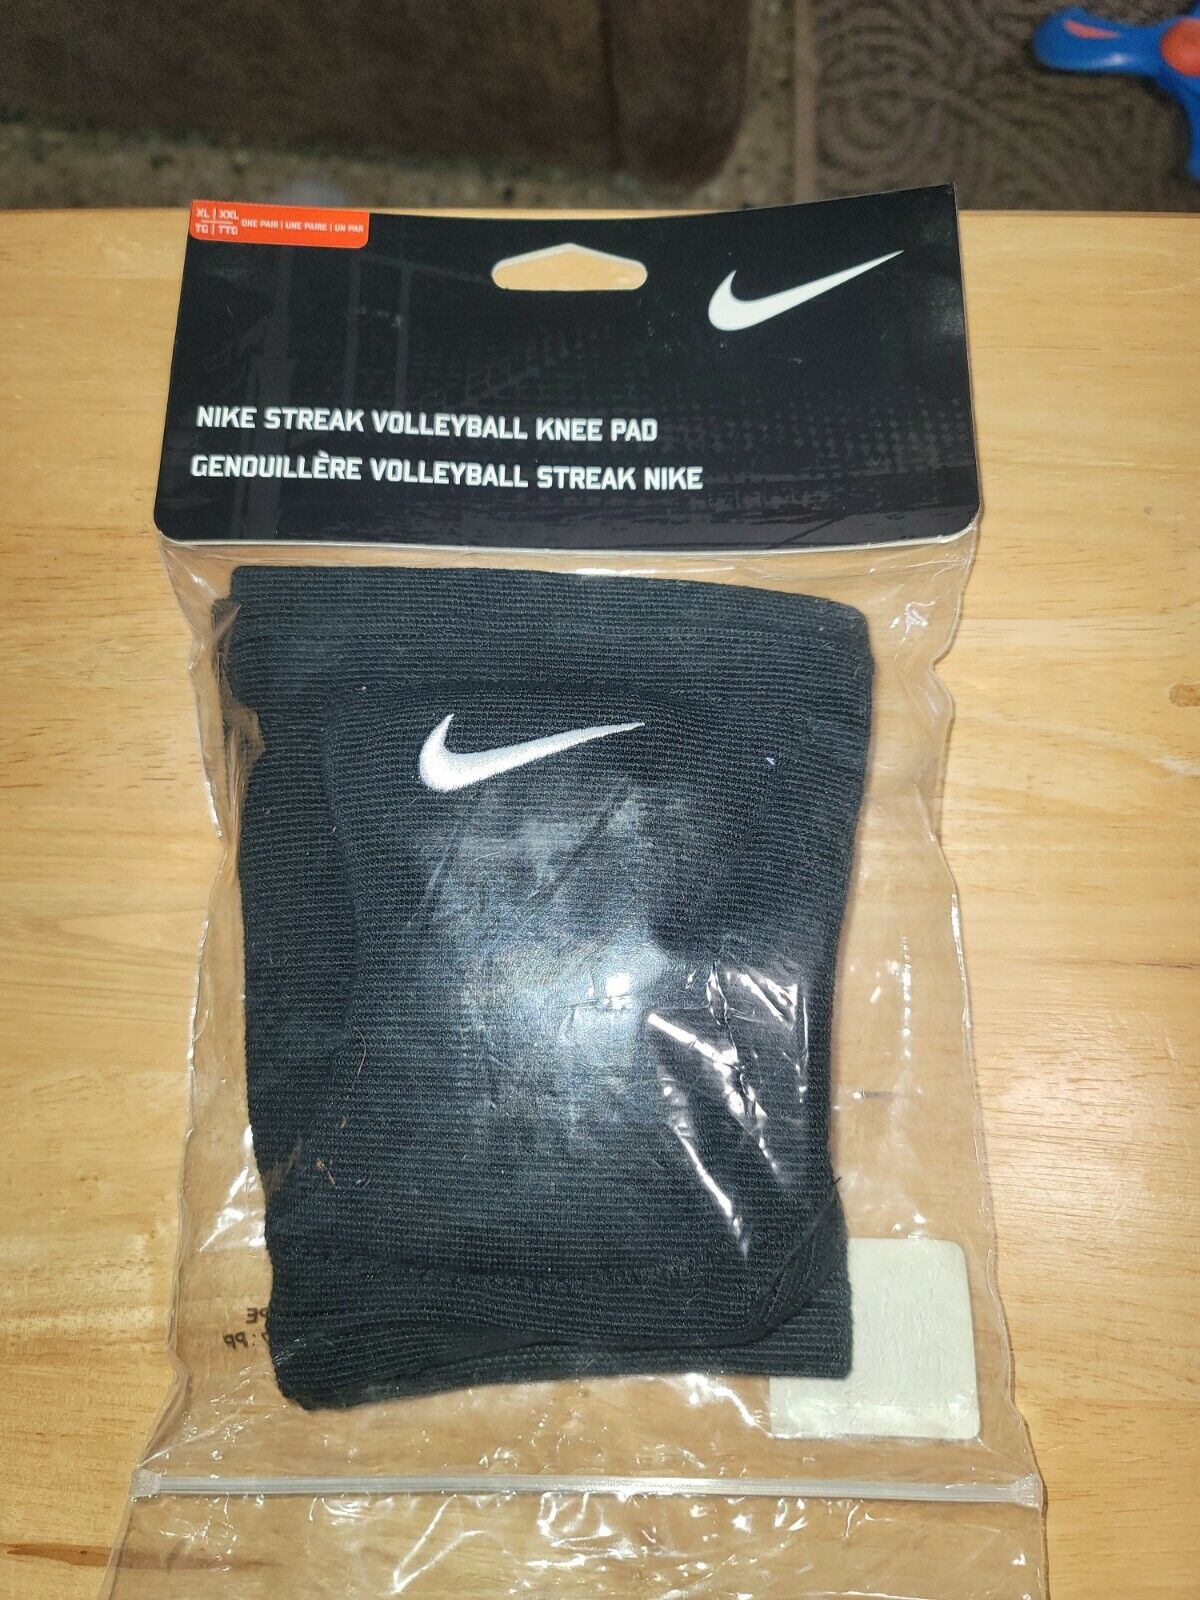 Nike Streak Volleyball Knee Pad Size Xl/xxl One Pair Sealed Package Black